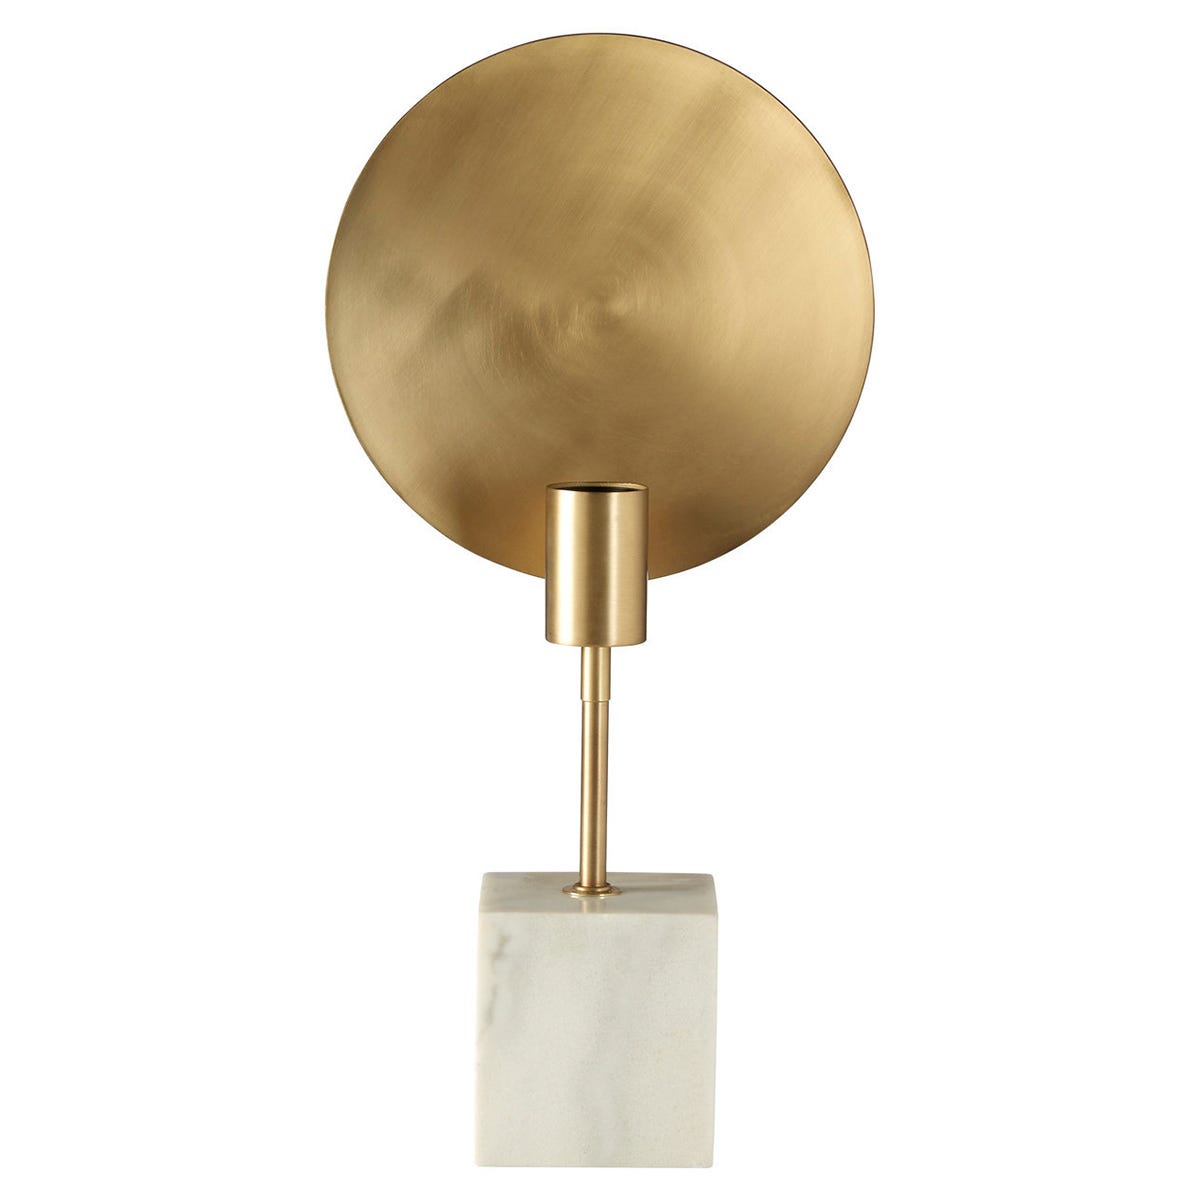 Interiors By Premier Table Lamp - Brushed Brass Finish/White Marble